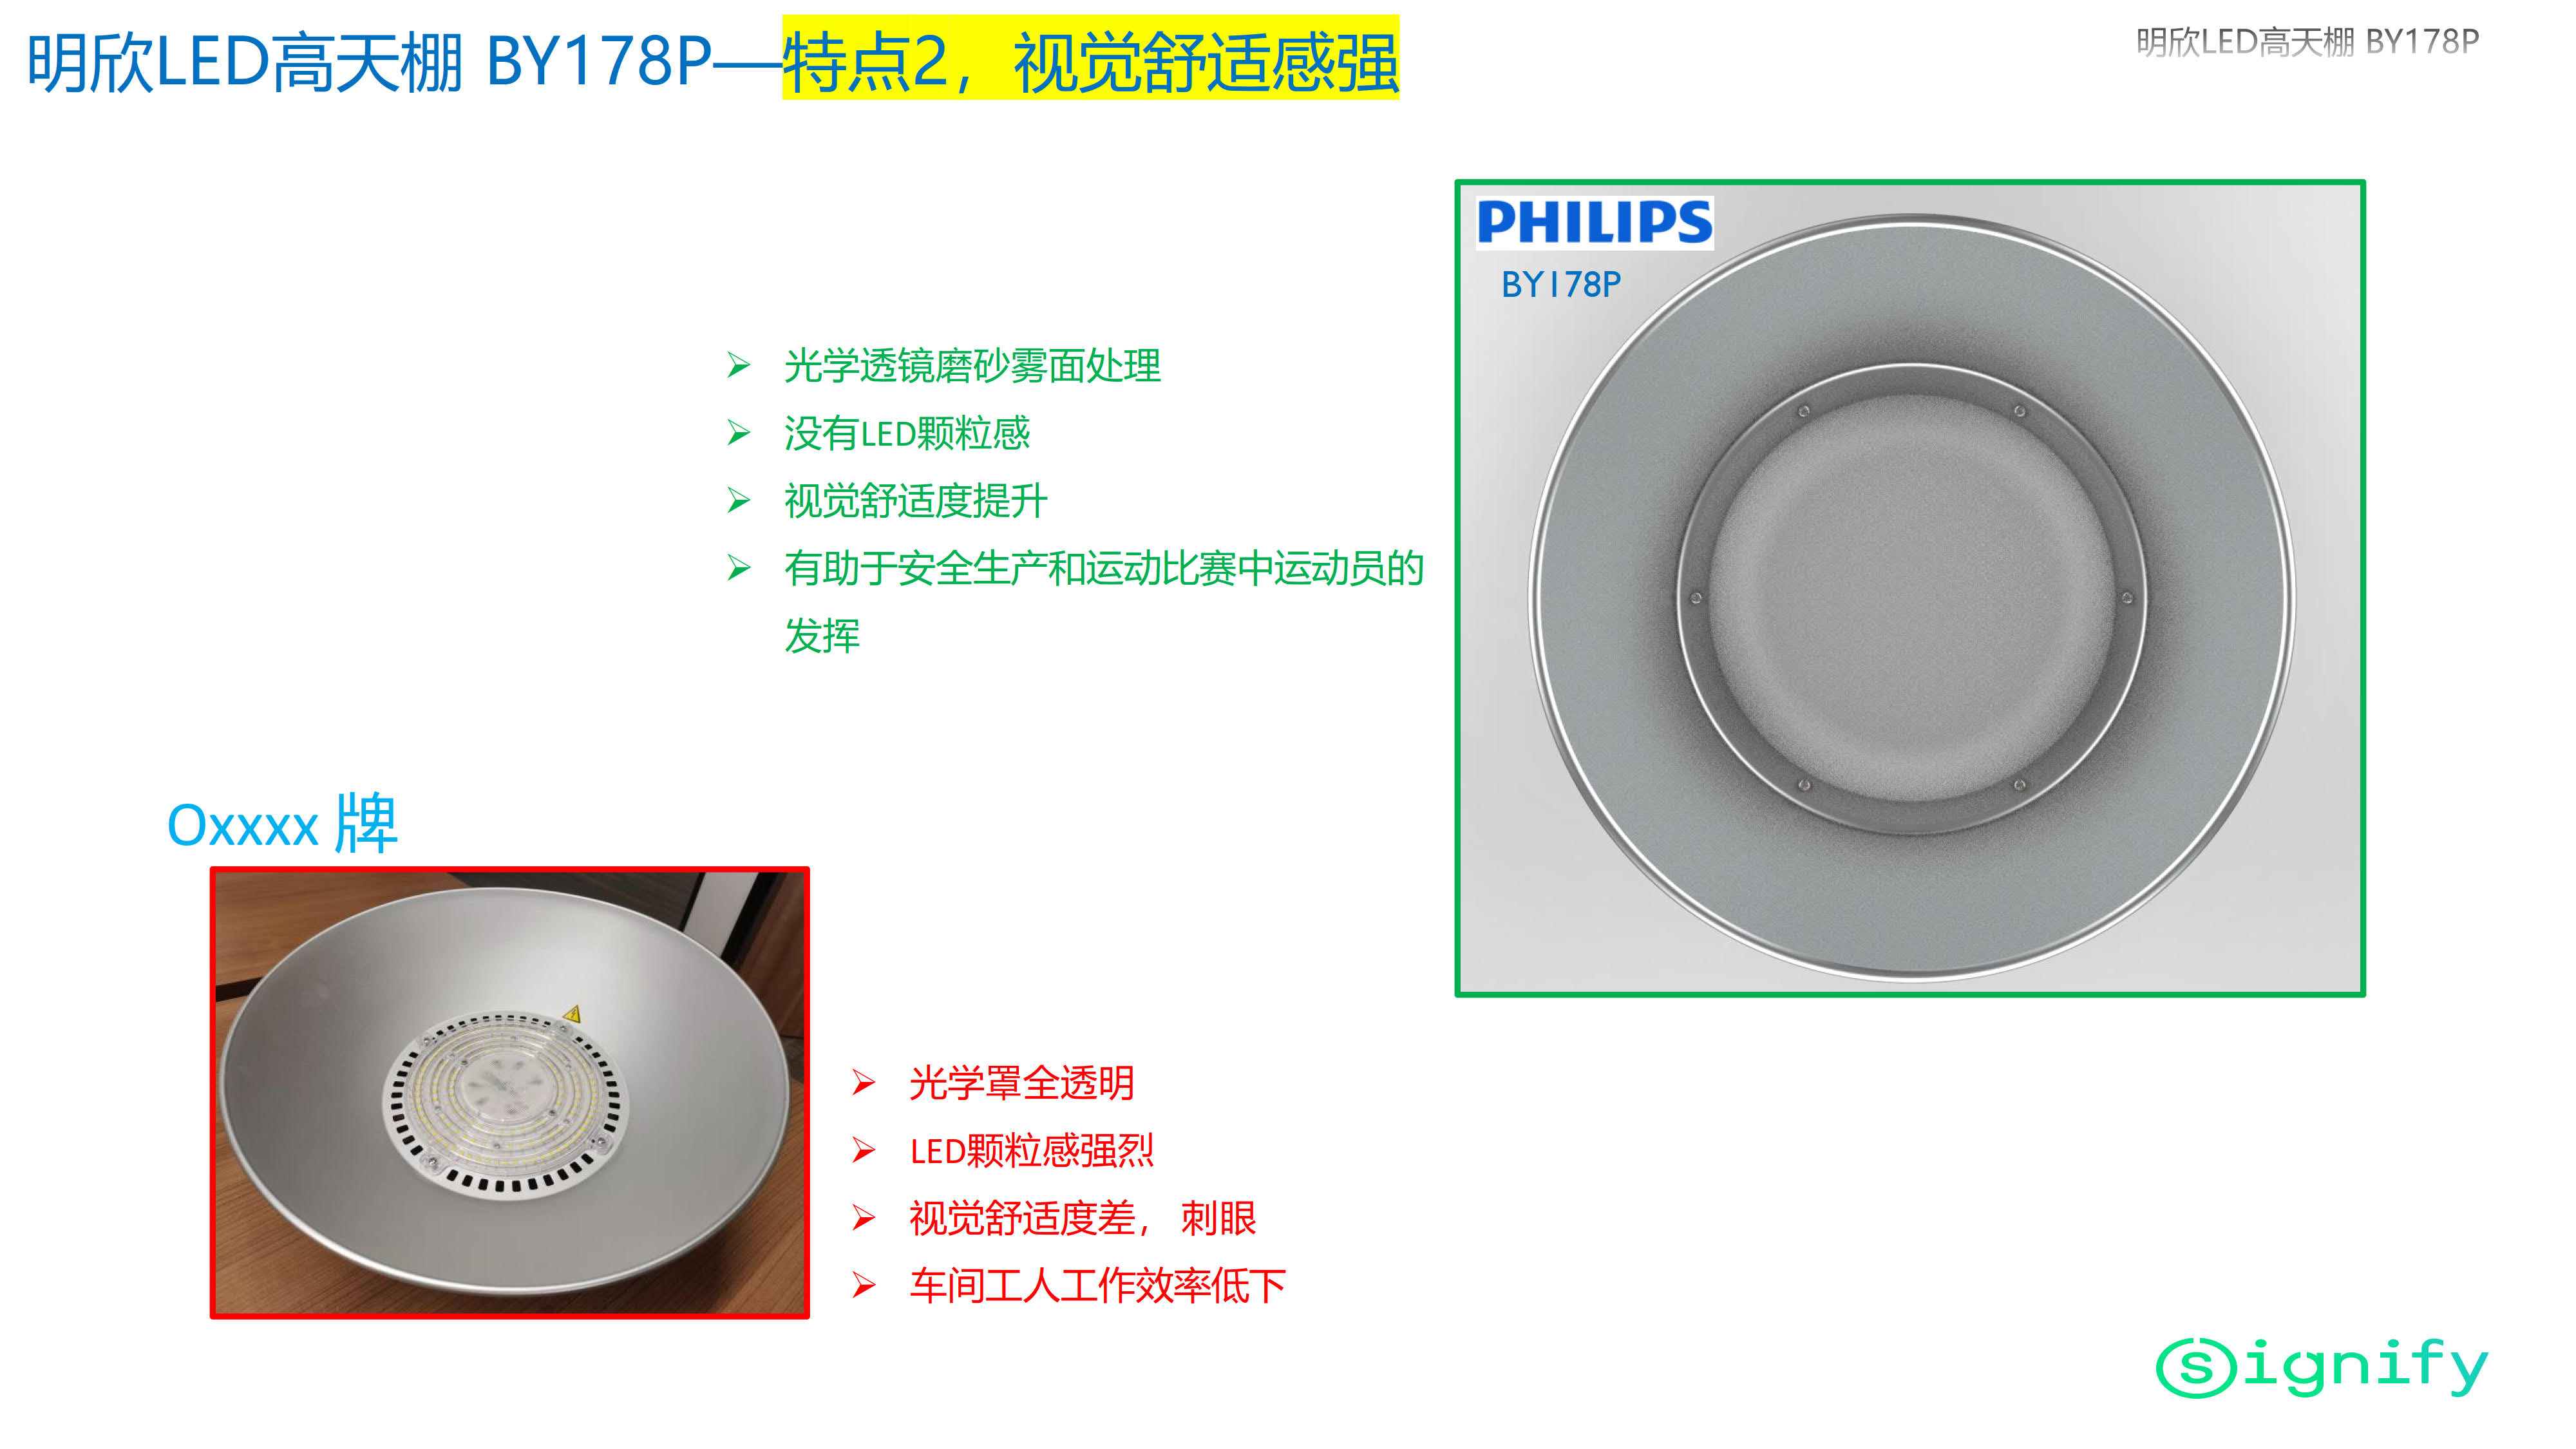 PHILIPS LED high bay light BY178P 150W NW PSU 911401837185